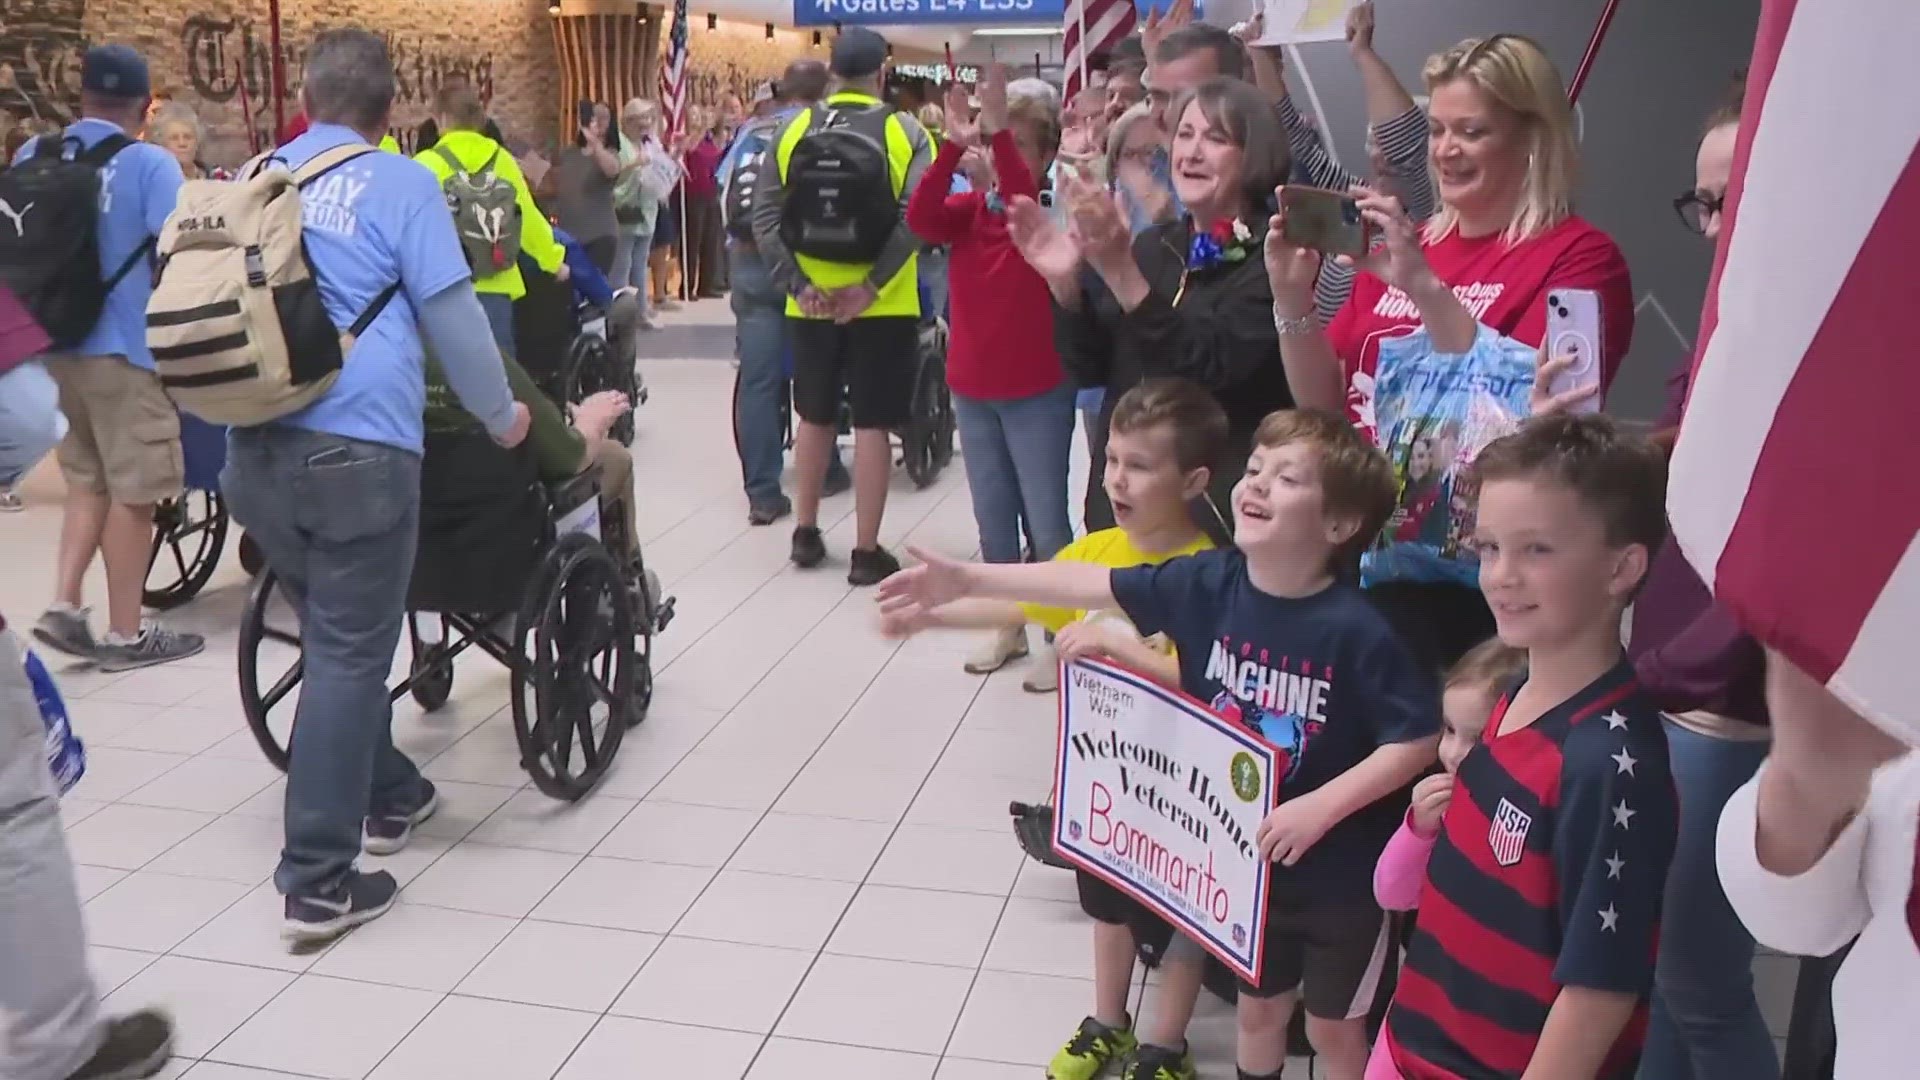 Dozens of war veterans arrived home in St. Louis on Tuesday. The St. Louis International Airport held a special welcome home event.